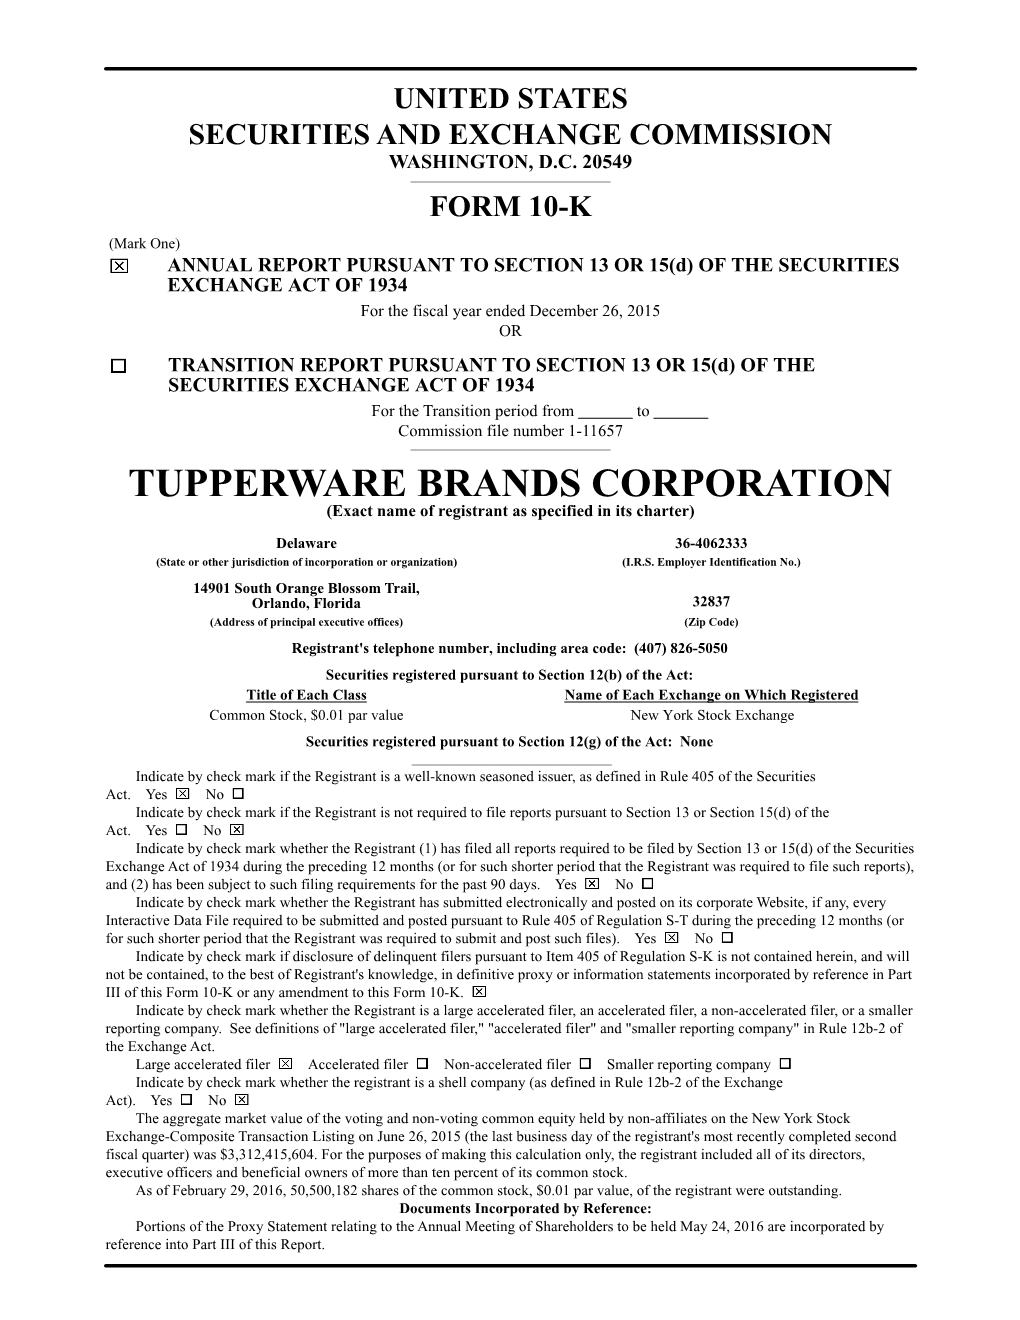 TUPPERWARE BRANDS CORPORATION (Exact Name of Registrant As Specified in Its Charter)